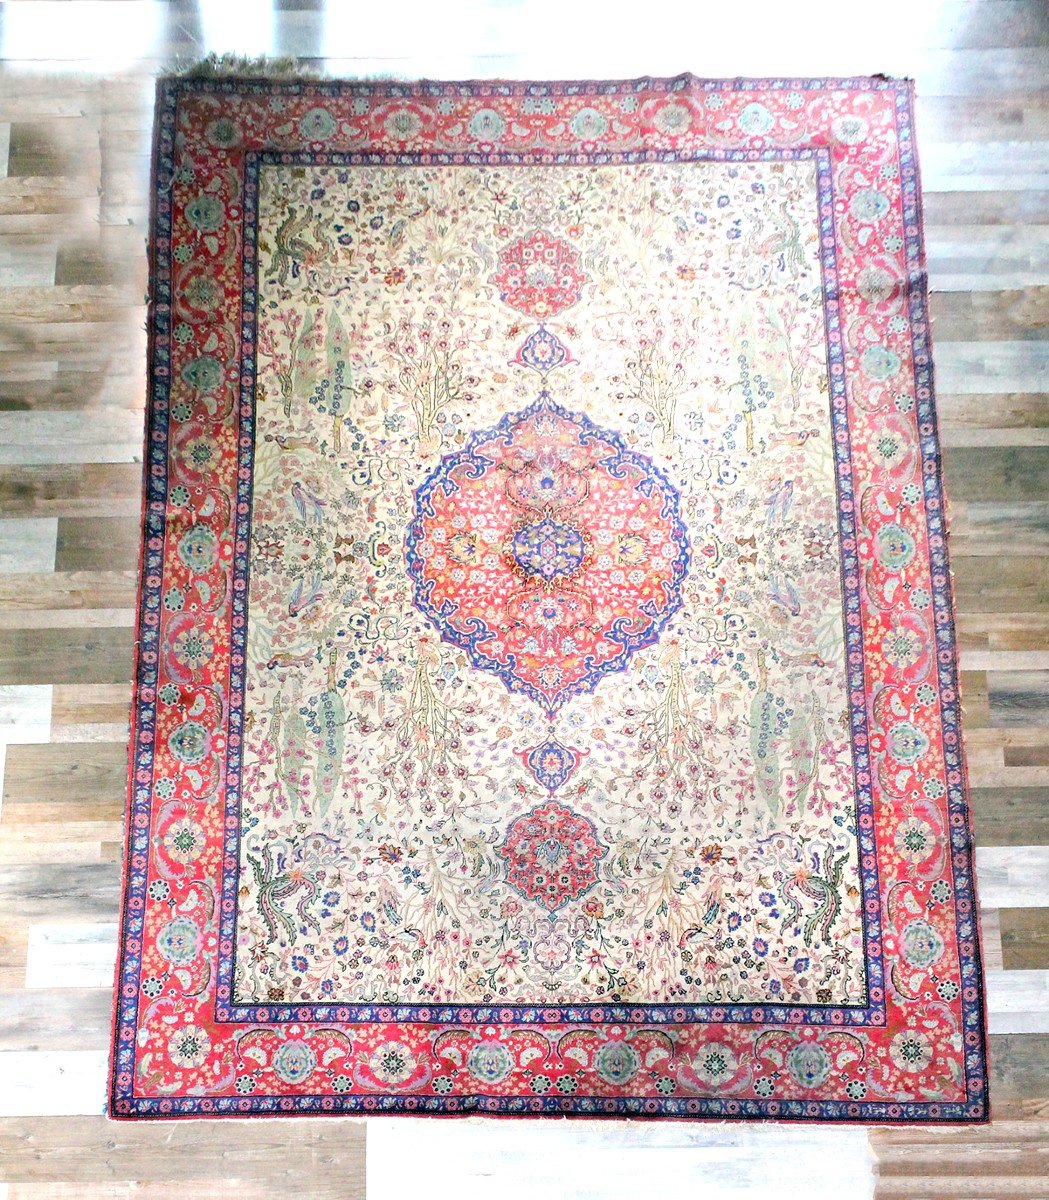 Large Tabriz Rug, Wool And Cotton, 1930s-40s